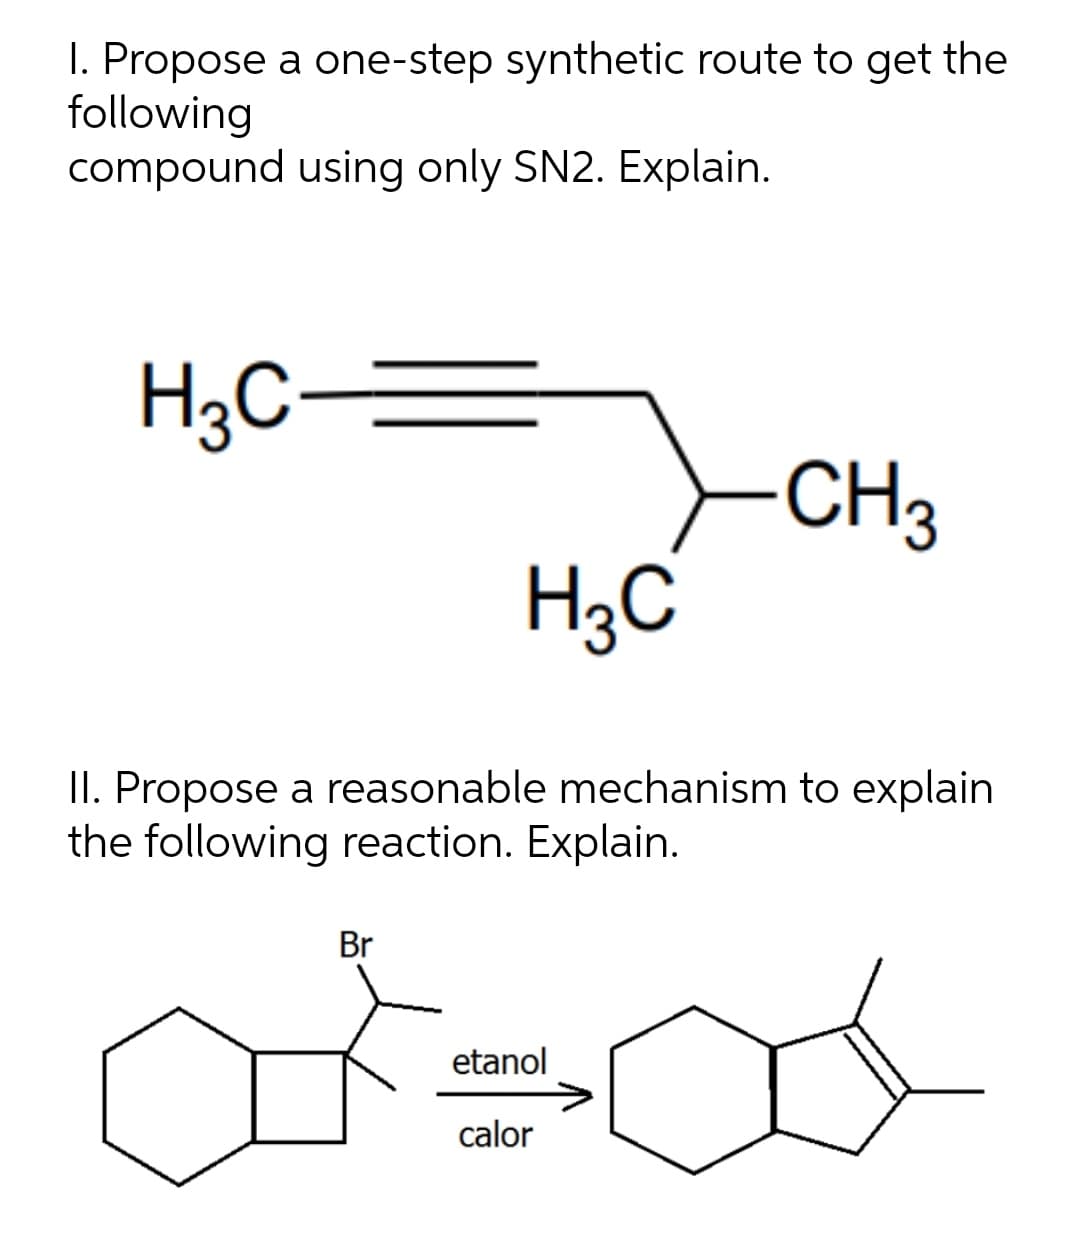 I. Propose a one-step synthetic route to get the
following
compound using only SN2. Explain.
H3C-
CH3
H3C
II. Propose a reasonable mechanism to explain
the following reaction. Explain.
Br
etanol
calor
